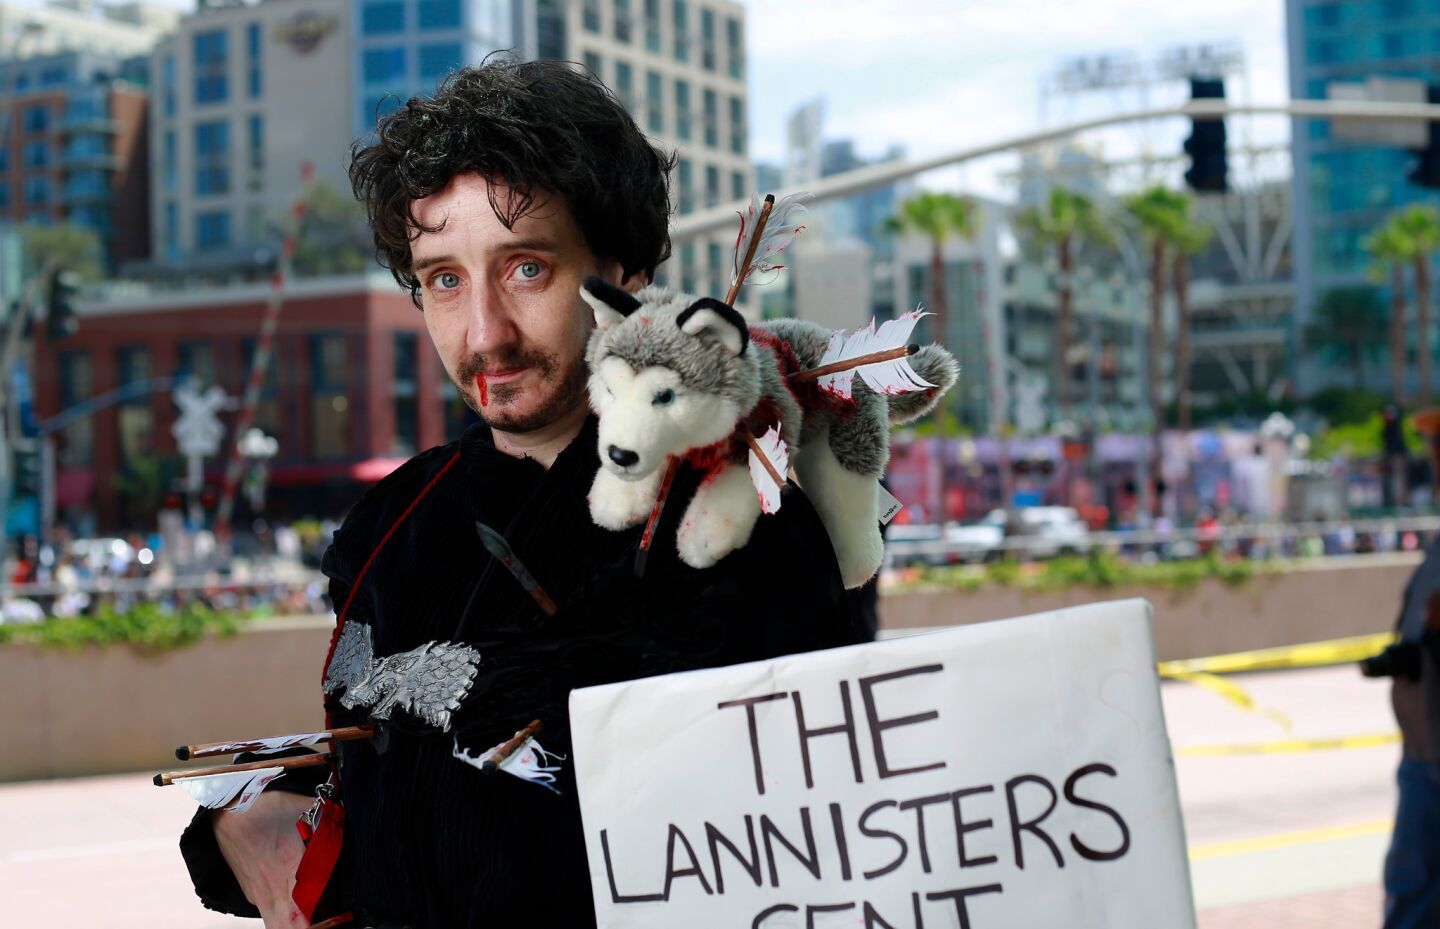 Dawn Richardon of Vancouver, Canada, dressed as Robb Stark from "Game of Thrones" at Comic-Con in San Diego on July 20.